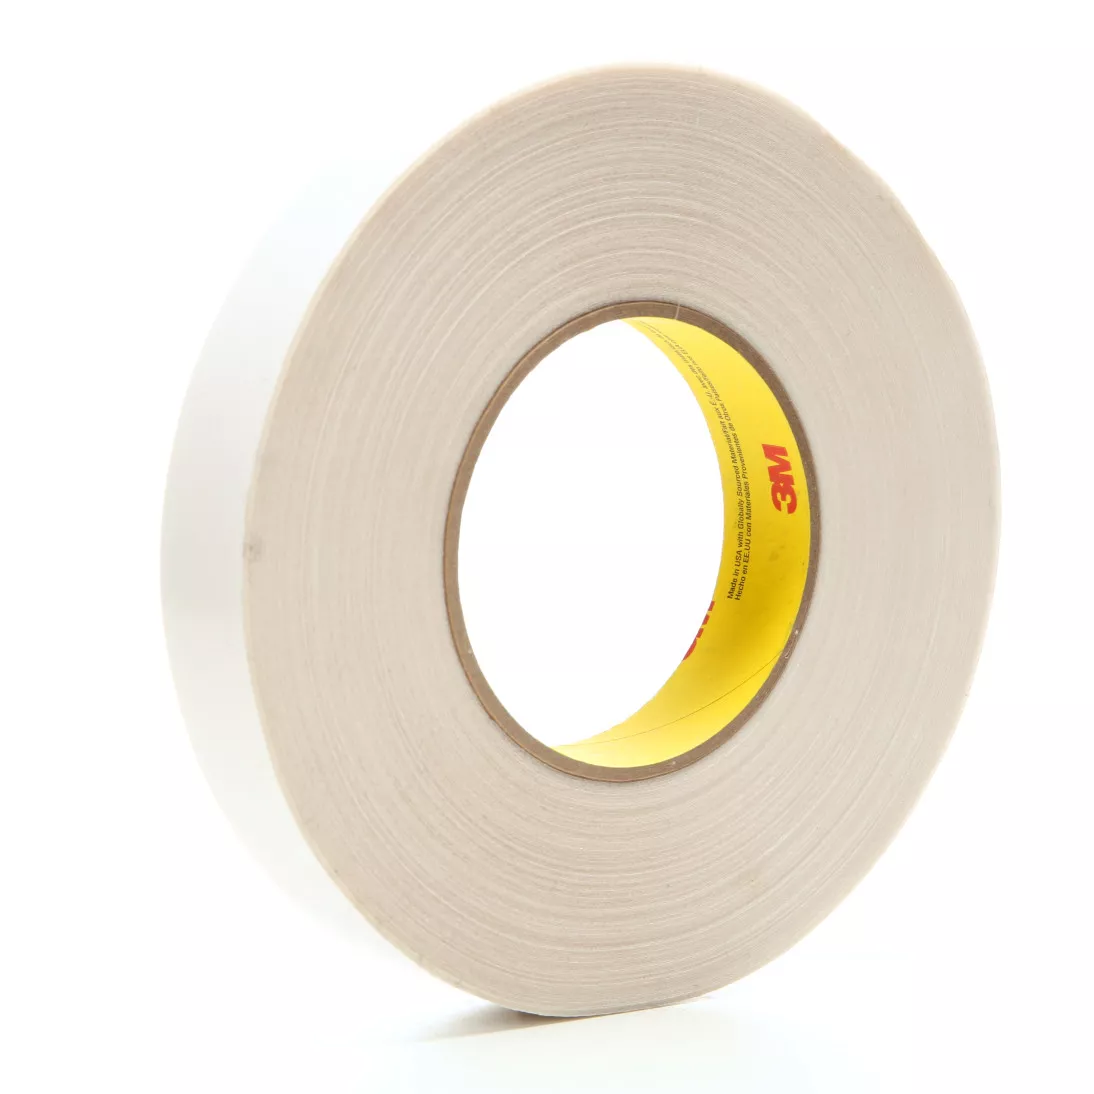 3M™ Double Coated Tape 9741, Clear, 24 mm x 55 m, 6.5 mil, 48 rolls per
case